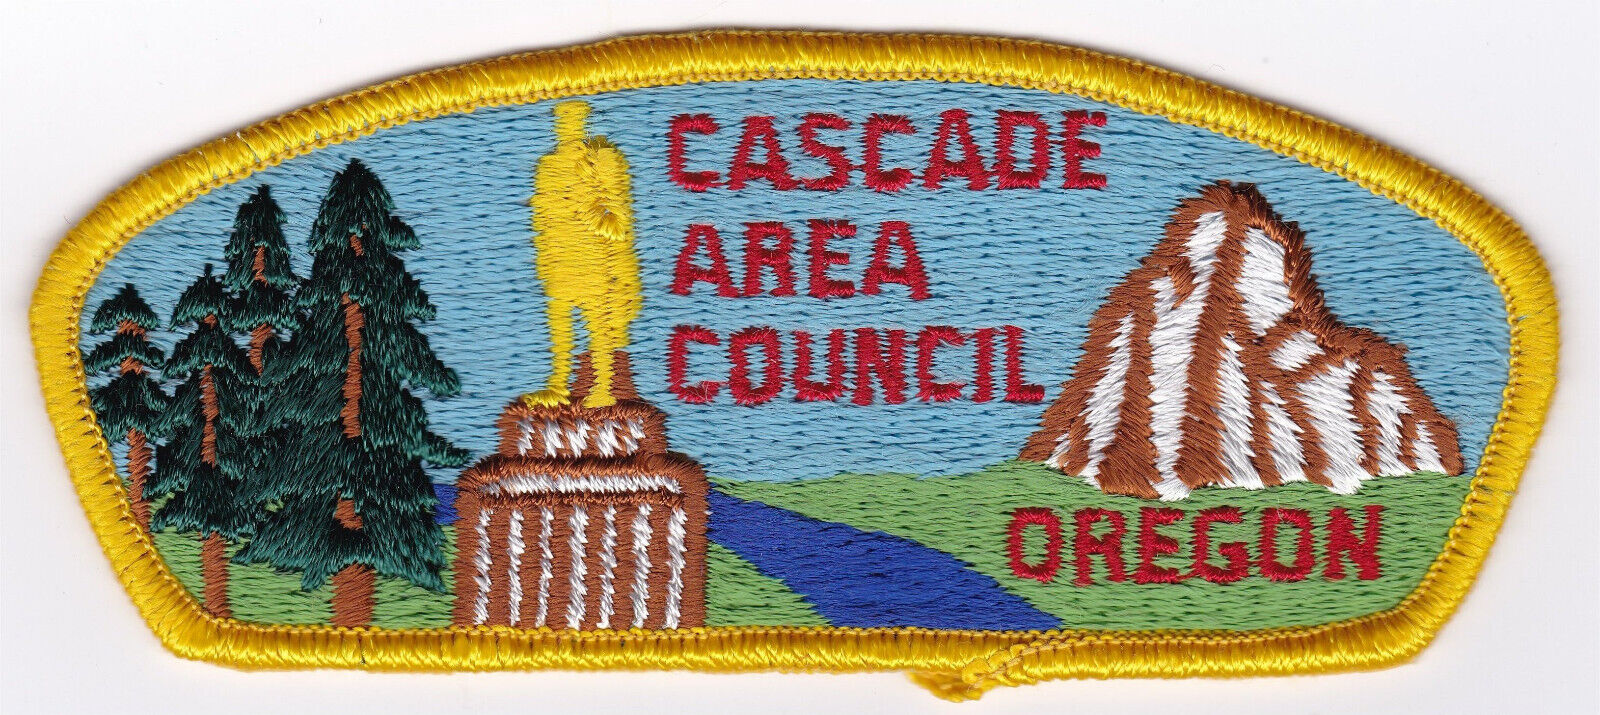 CSP - CASCADE AREA COUNCIL - S-2 - MERGED IN 1992